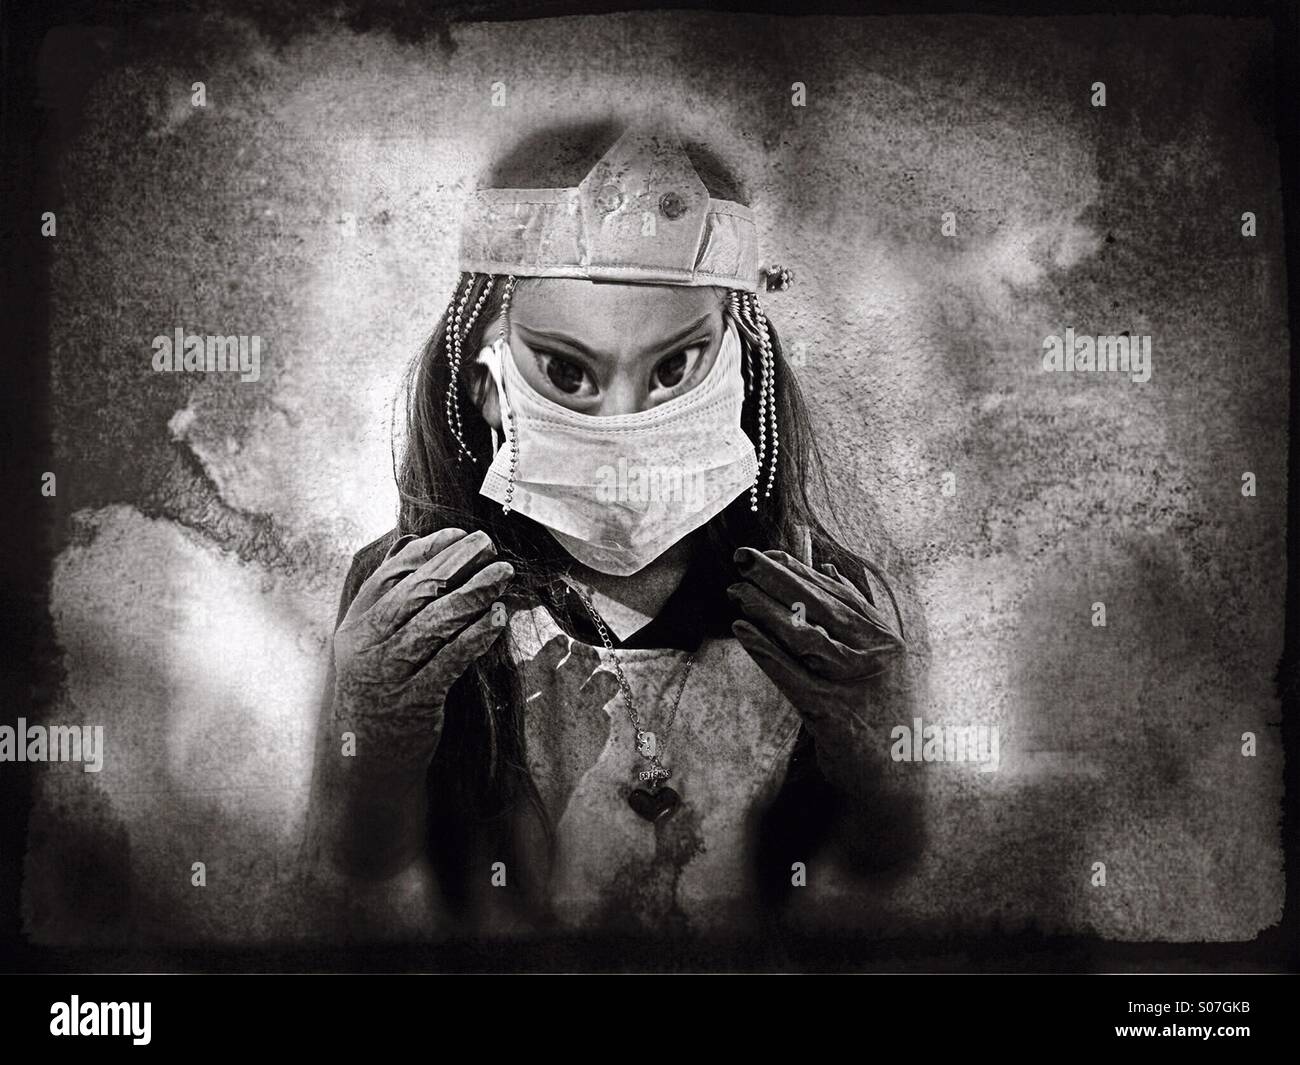 A seven-year-old girl playing dress-up with a surgical mask, gloves and crown with demonic eyes. Stock Photo